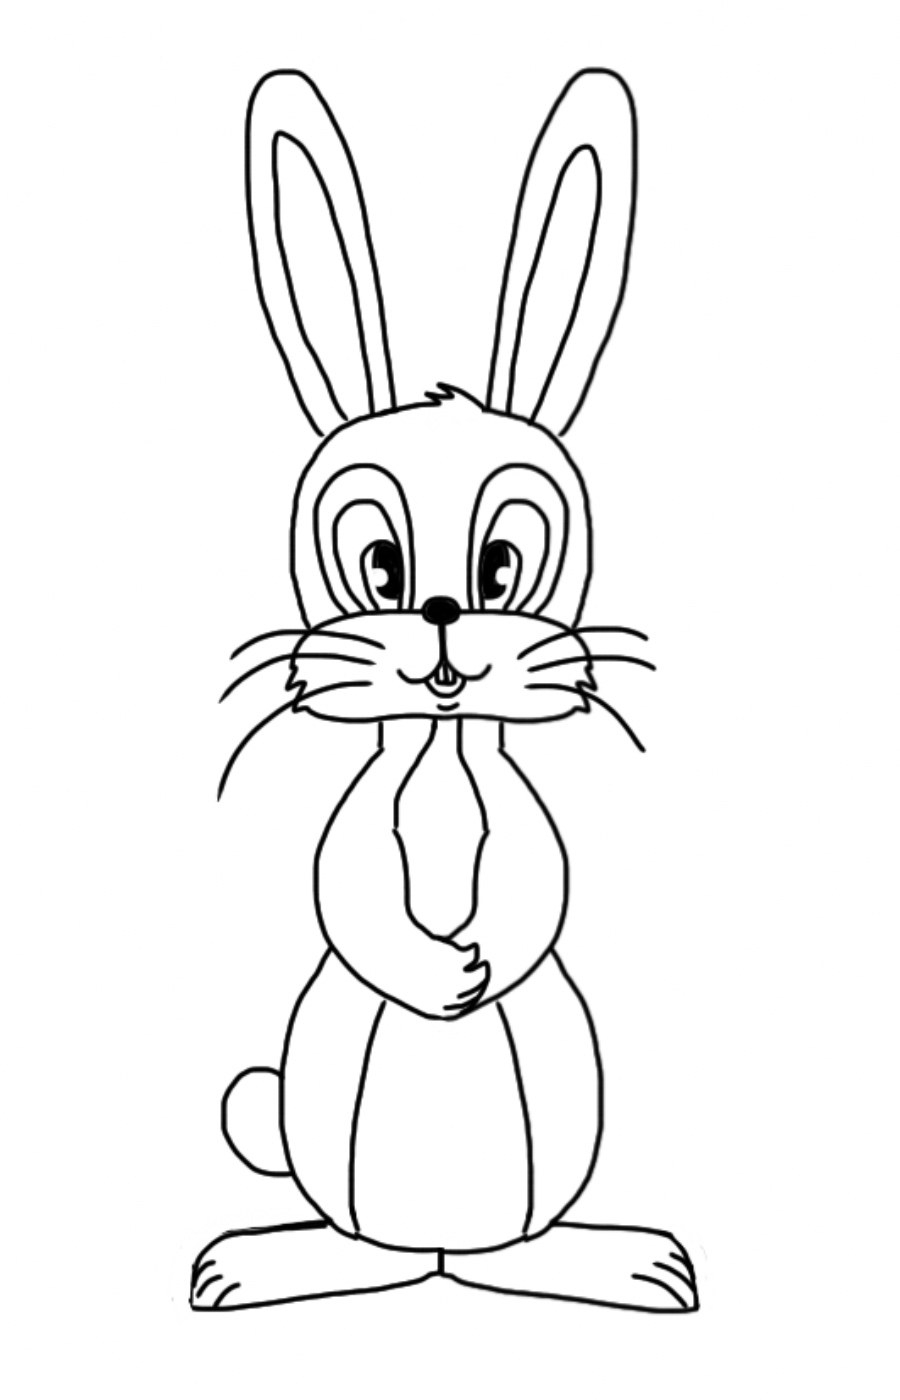 How to Draw an Easter Bunny. 